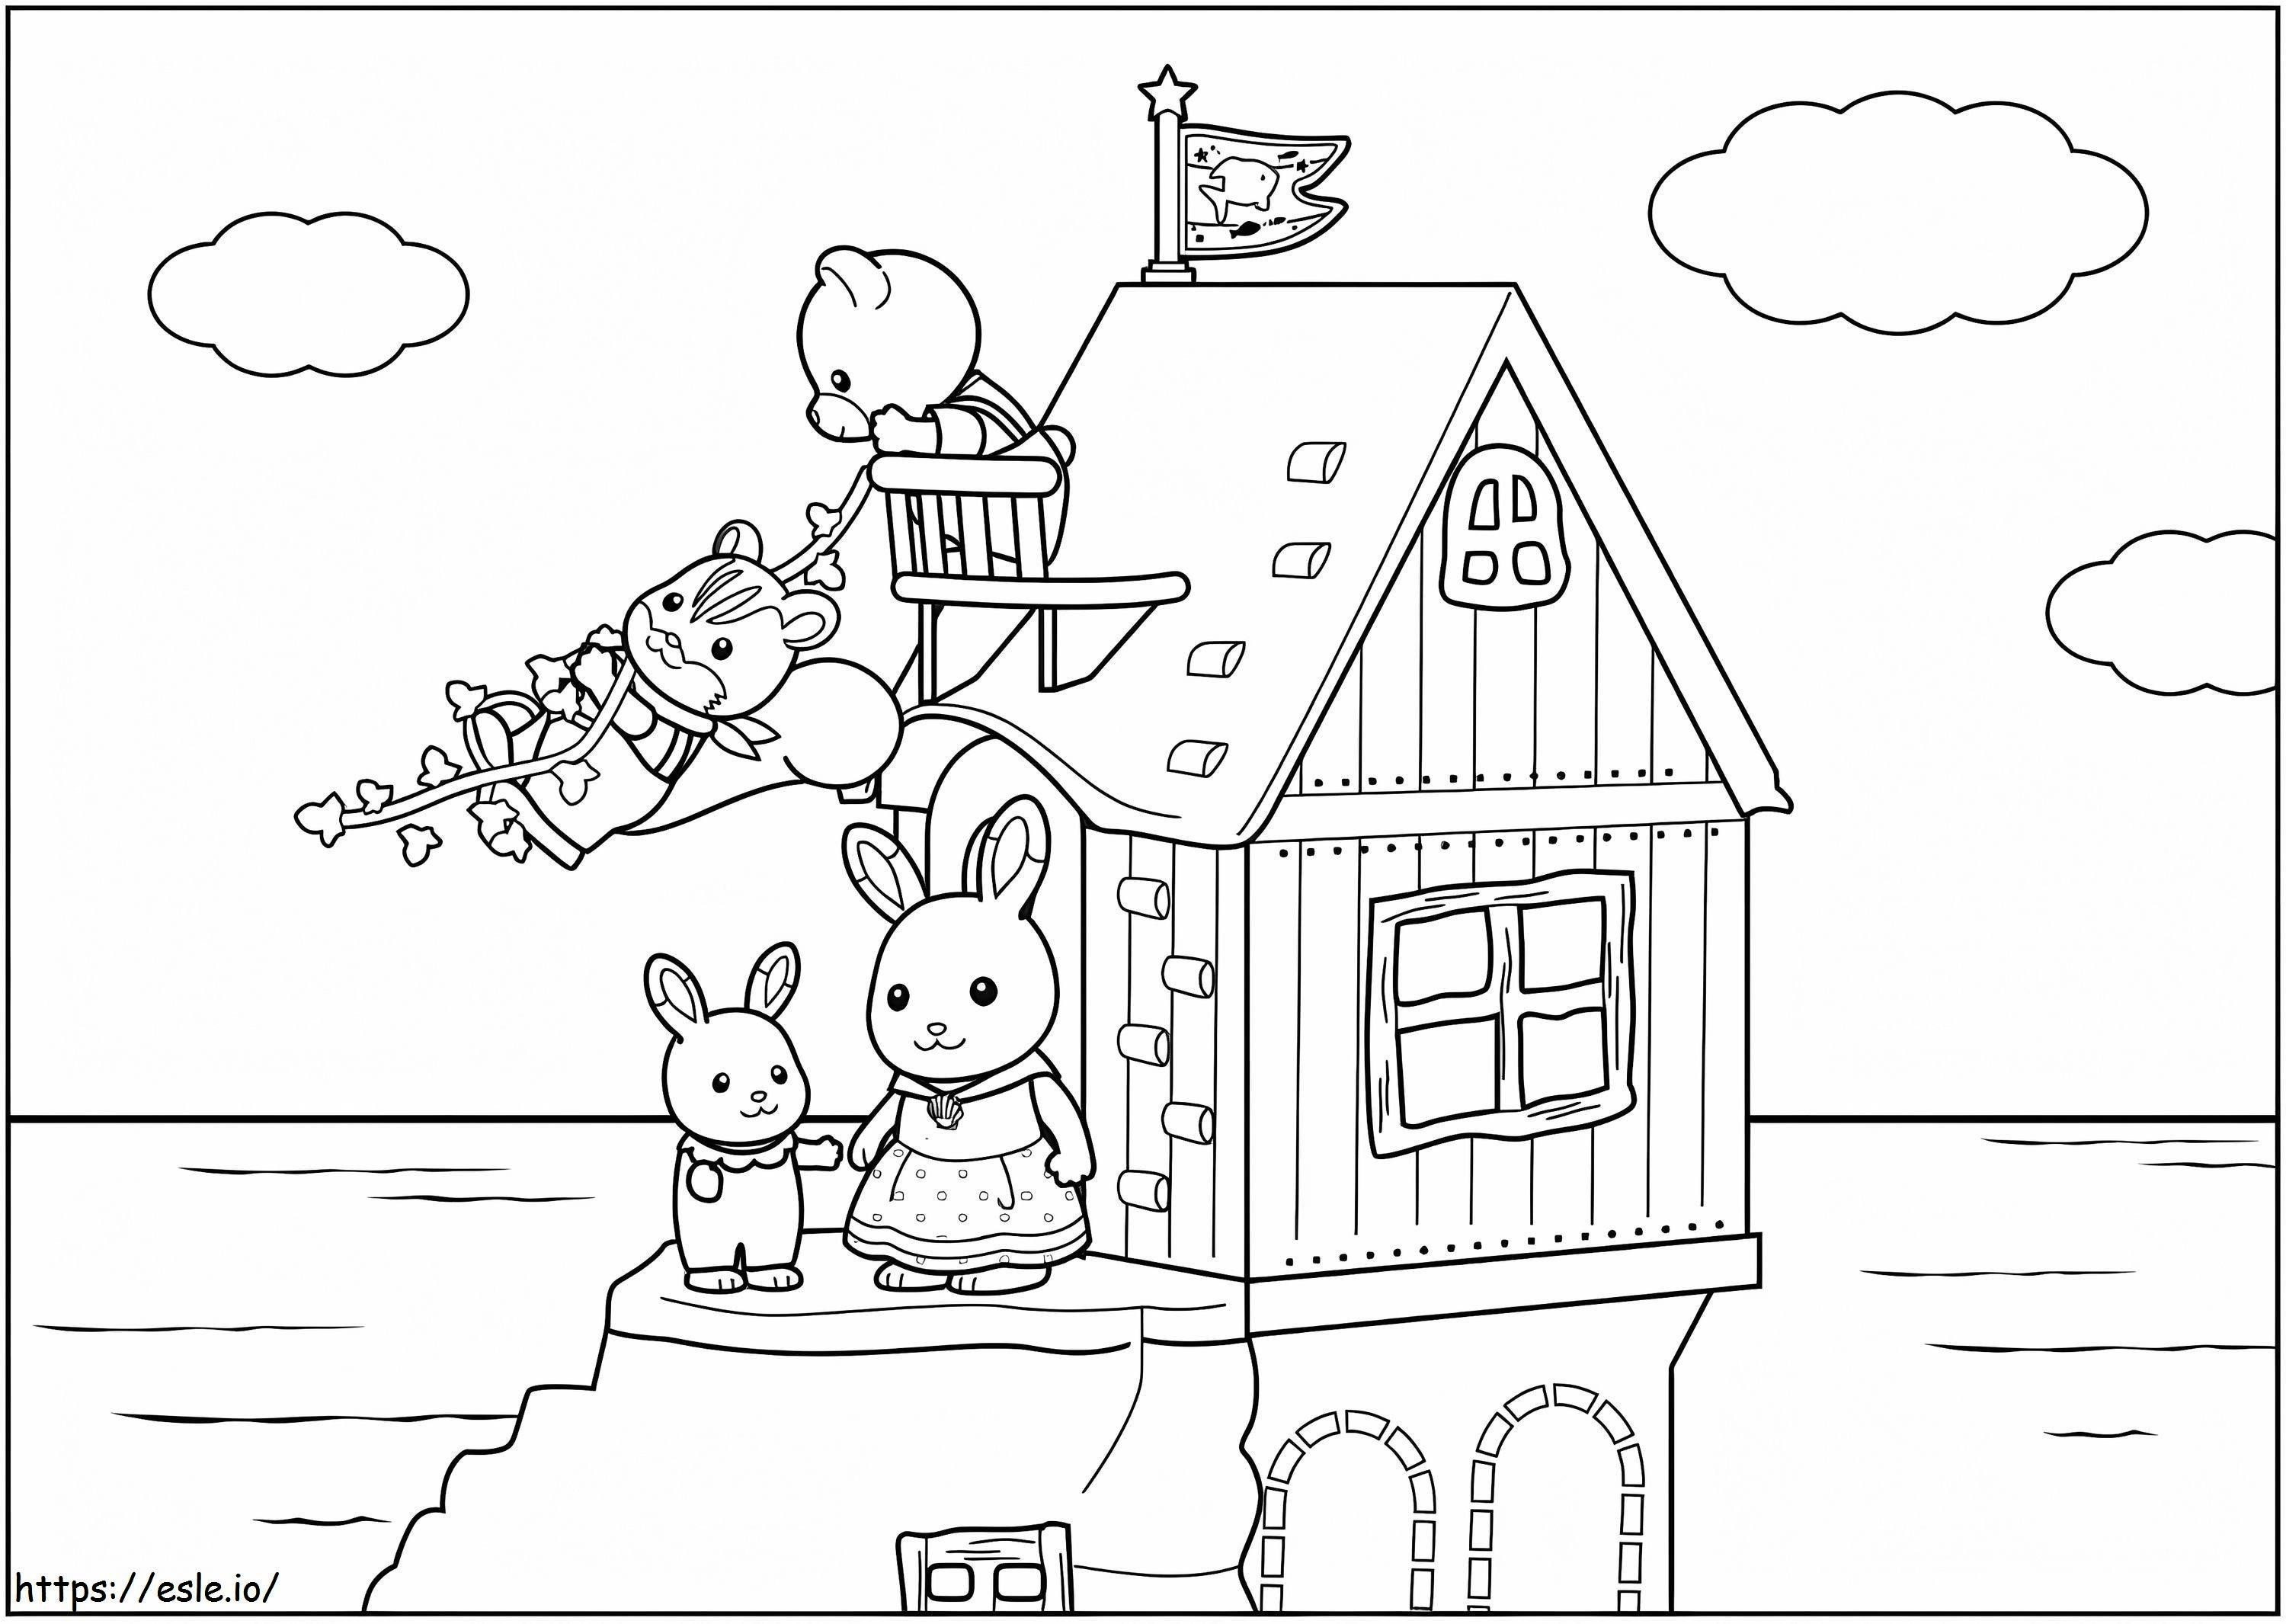 Sylvanian Families 2 coloring page